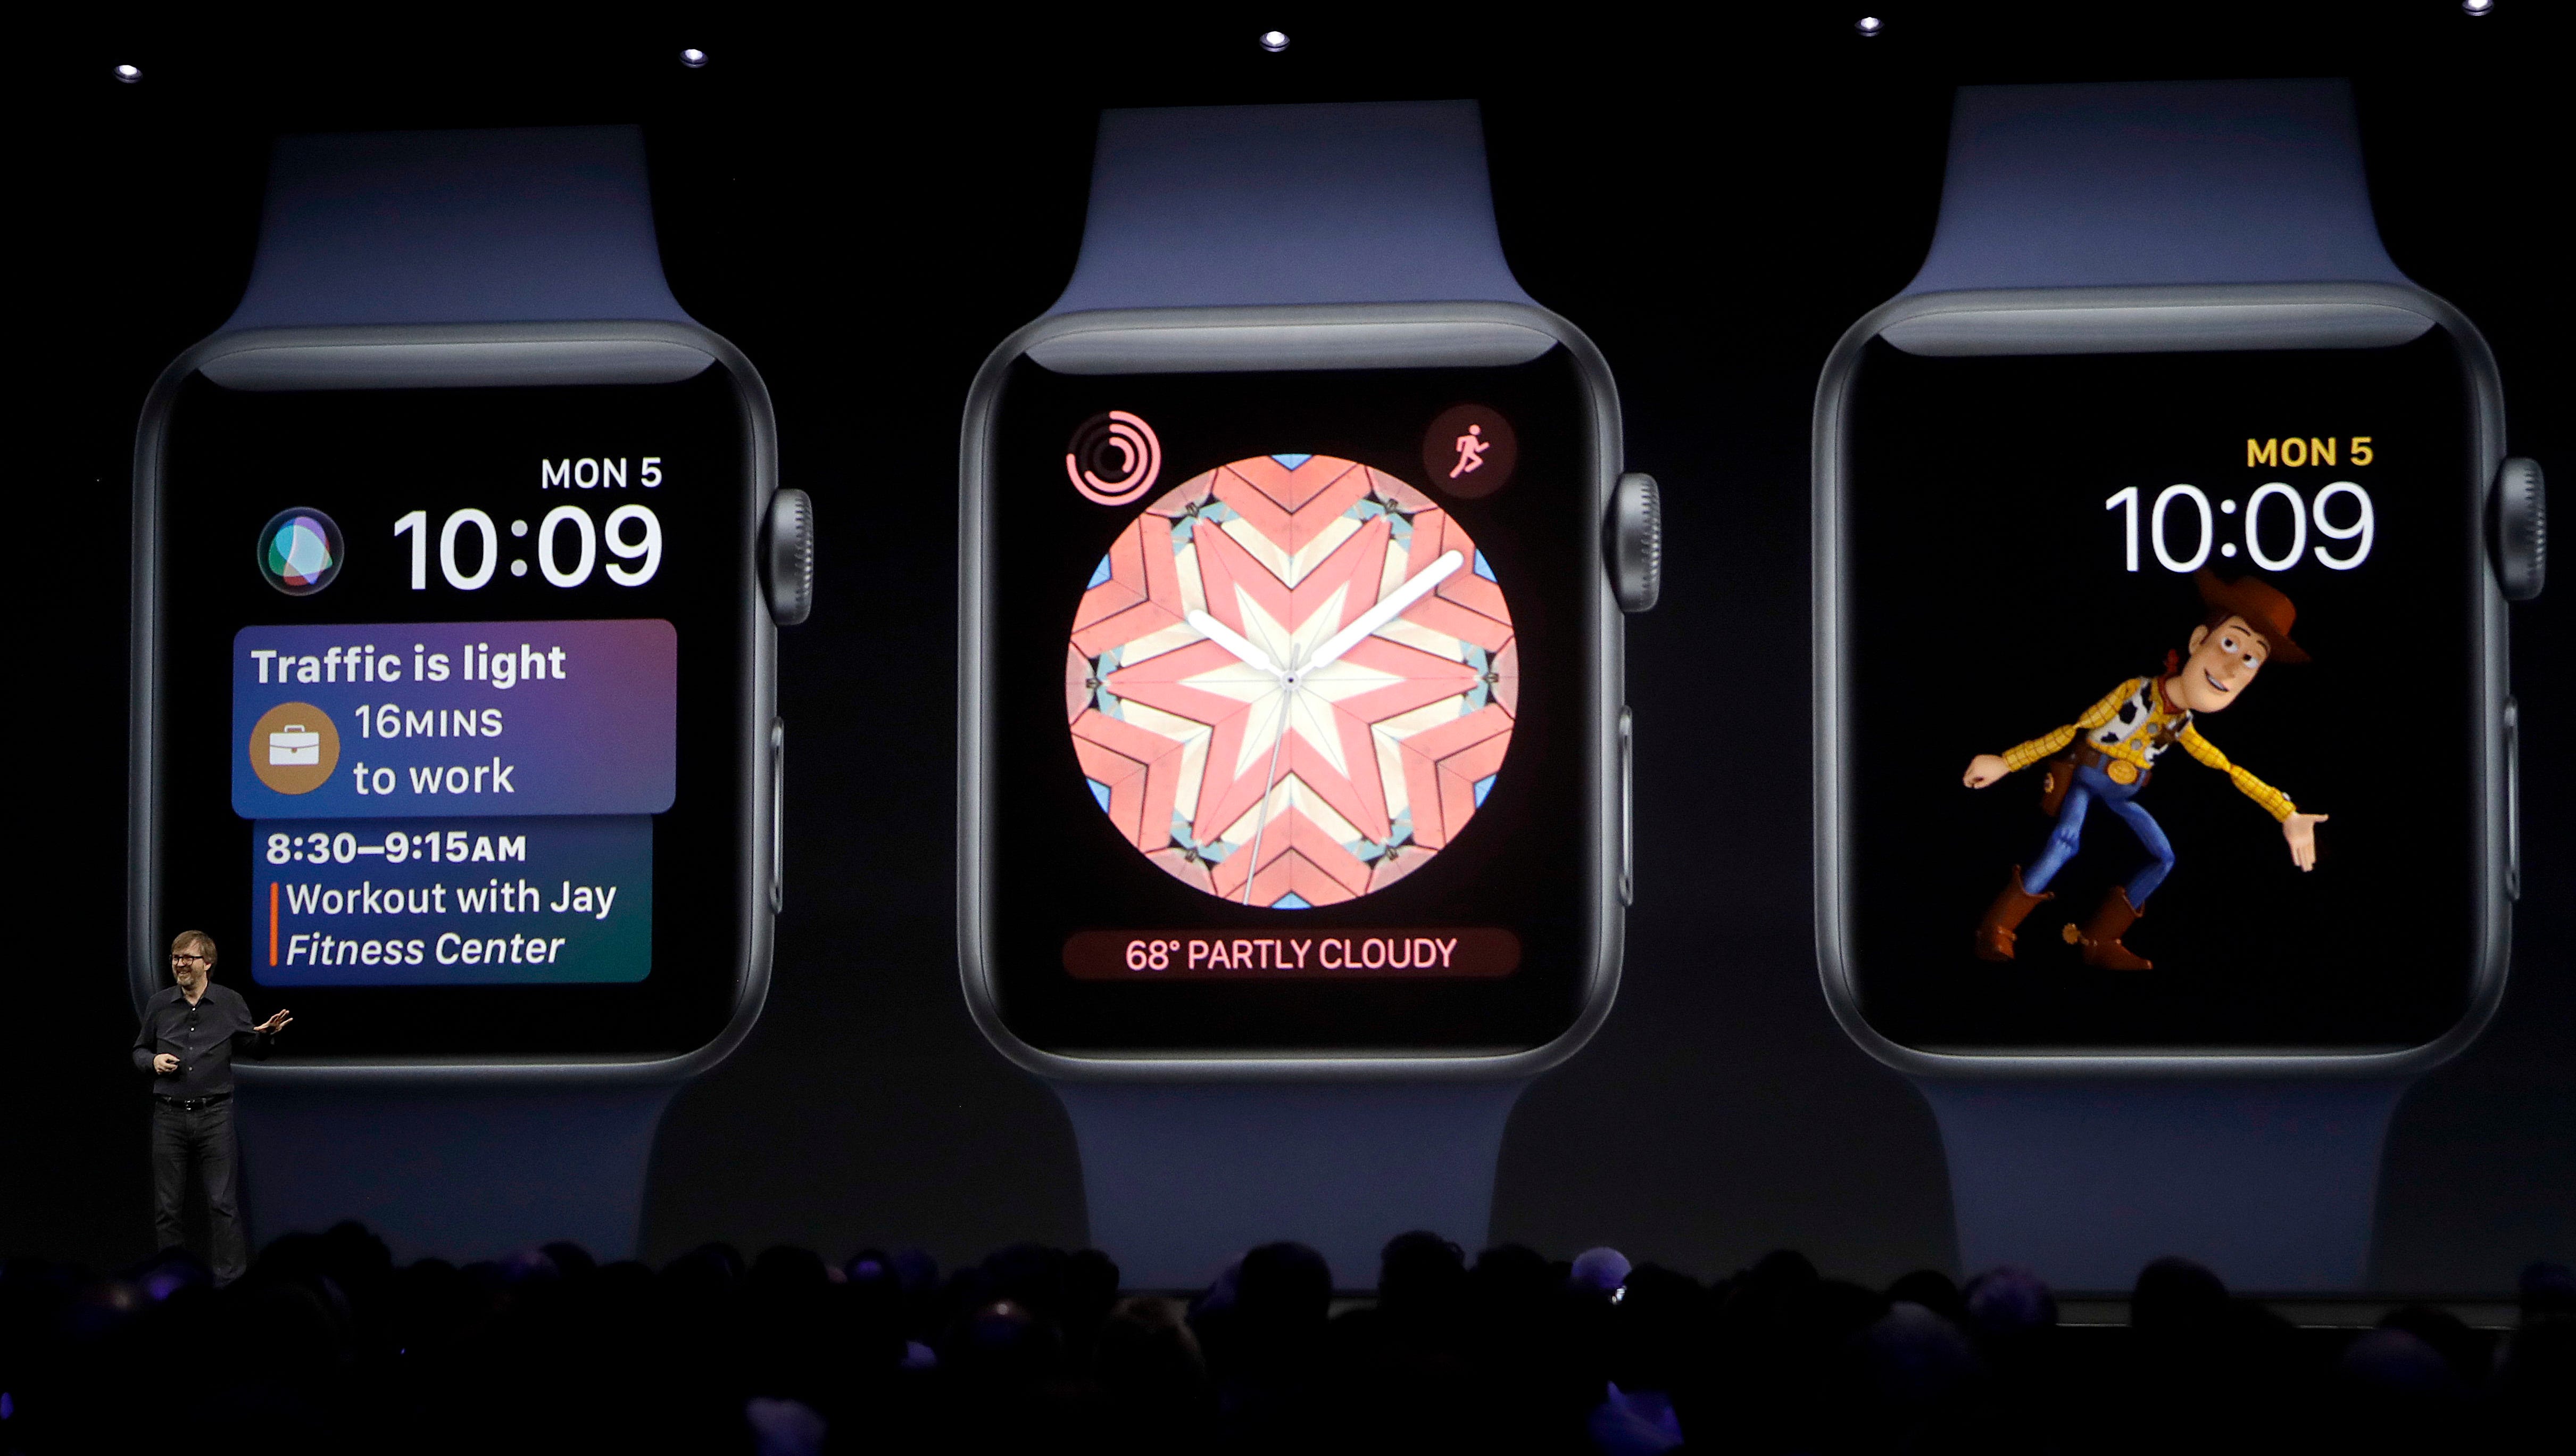 Apple's Kevin Lynch speaks about the Apple Watch announcement of new products at the Apple Worldwide Developers Conference.